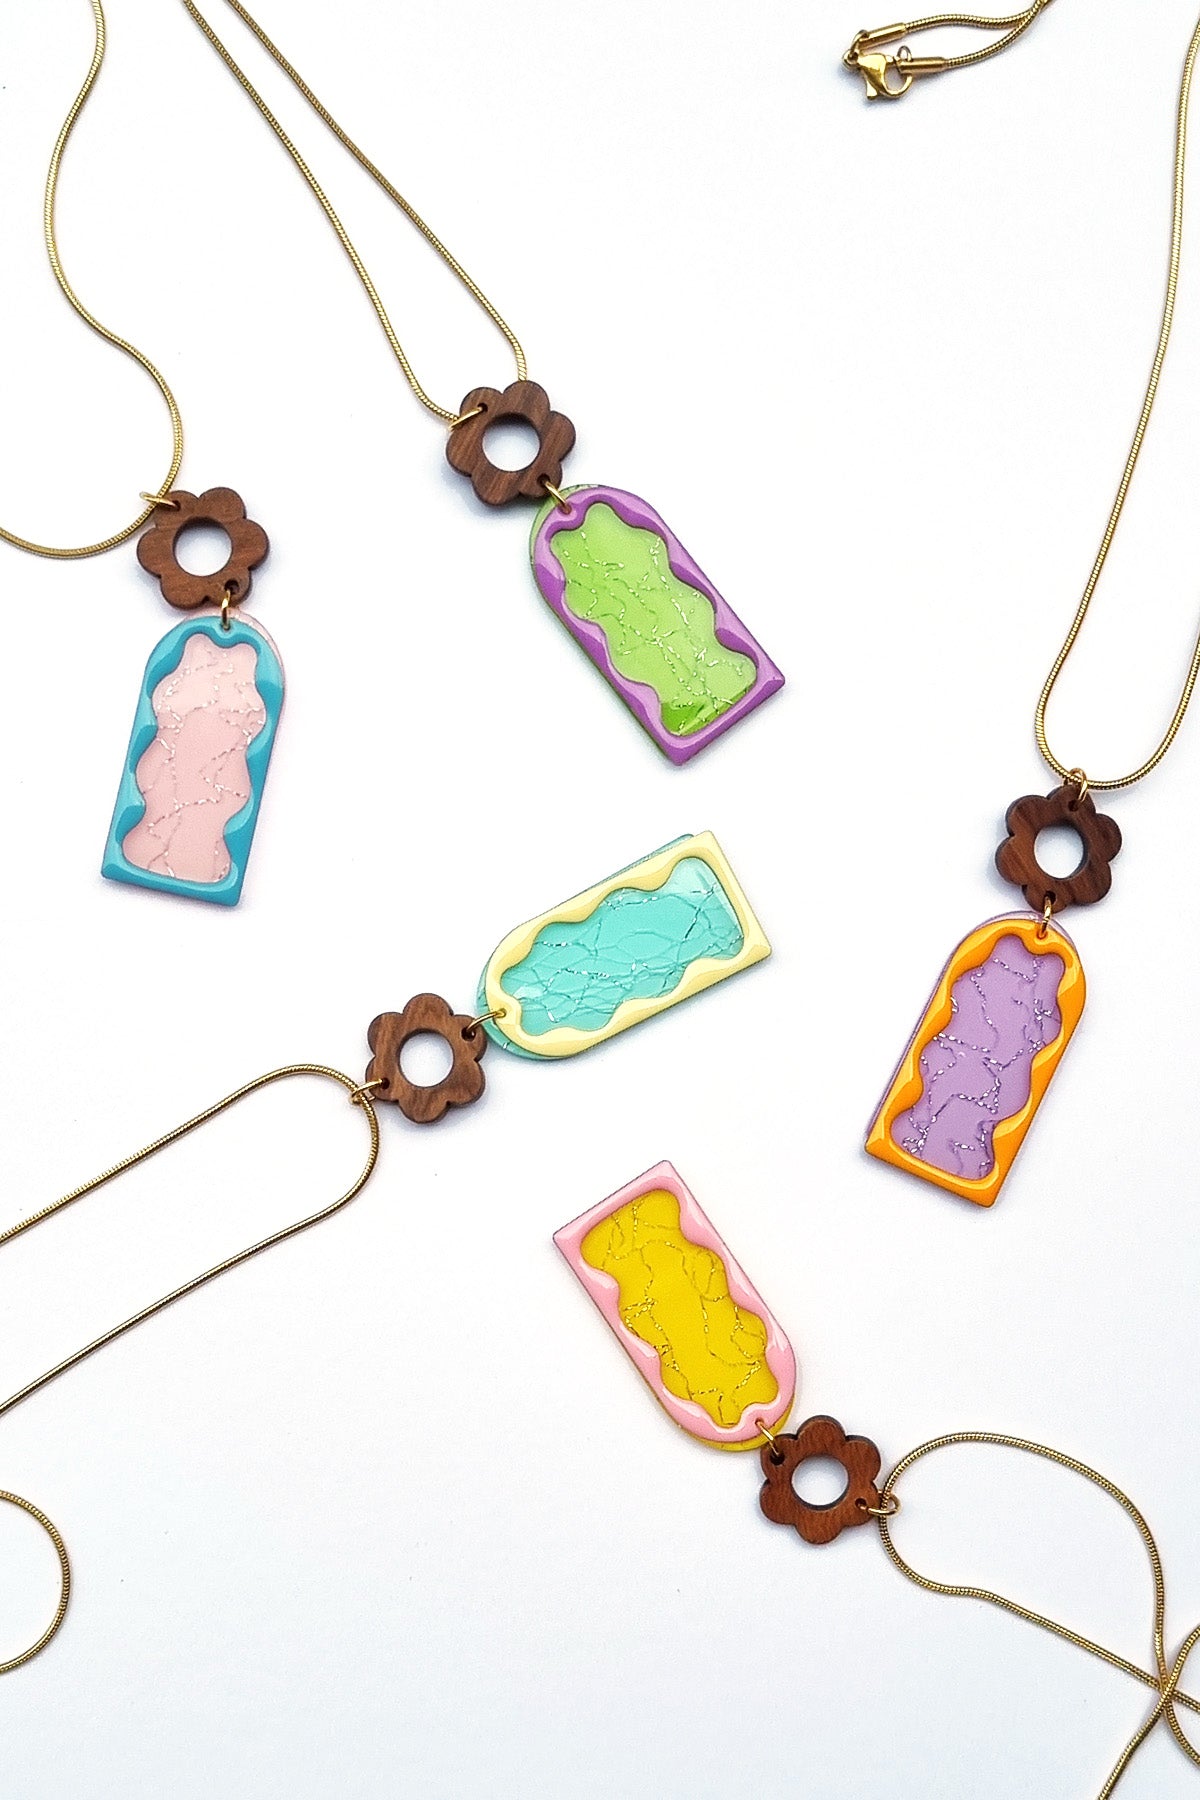 Four mixtape necklaces in the five colourways; Purple with orange frame, Aqua with yellow frame, Yellow with pink frame,  Green with purple frame, and Pink with blue frame lay flat against a white background.